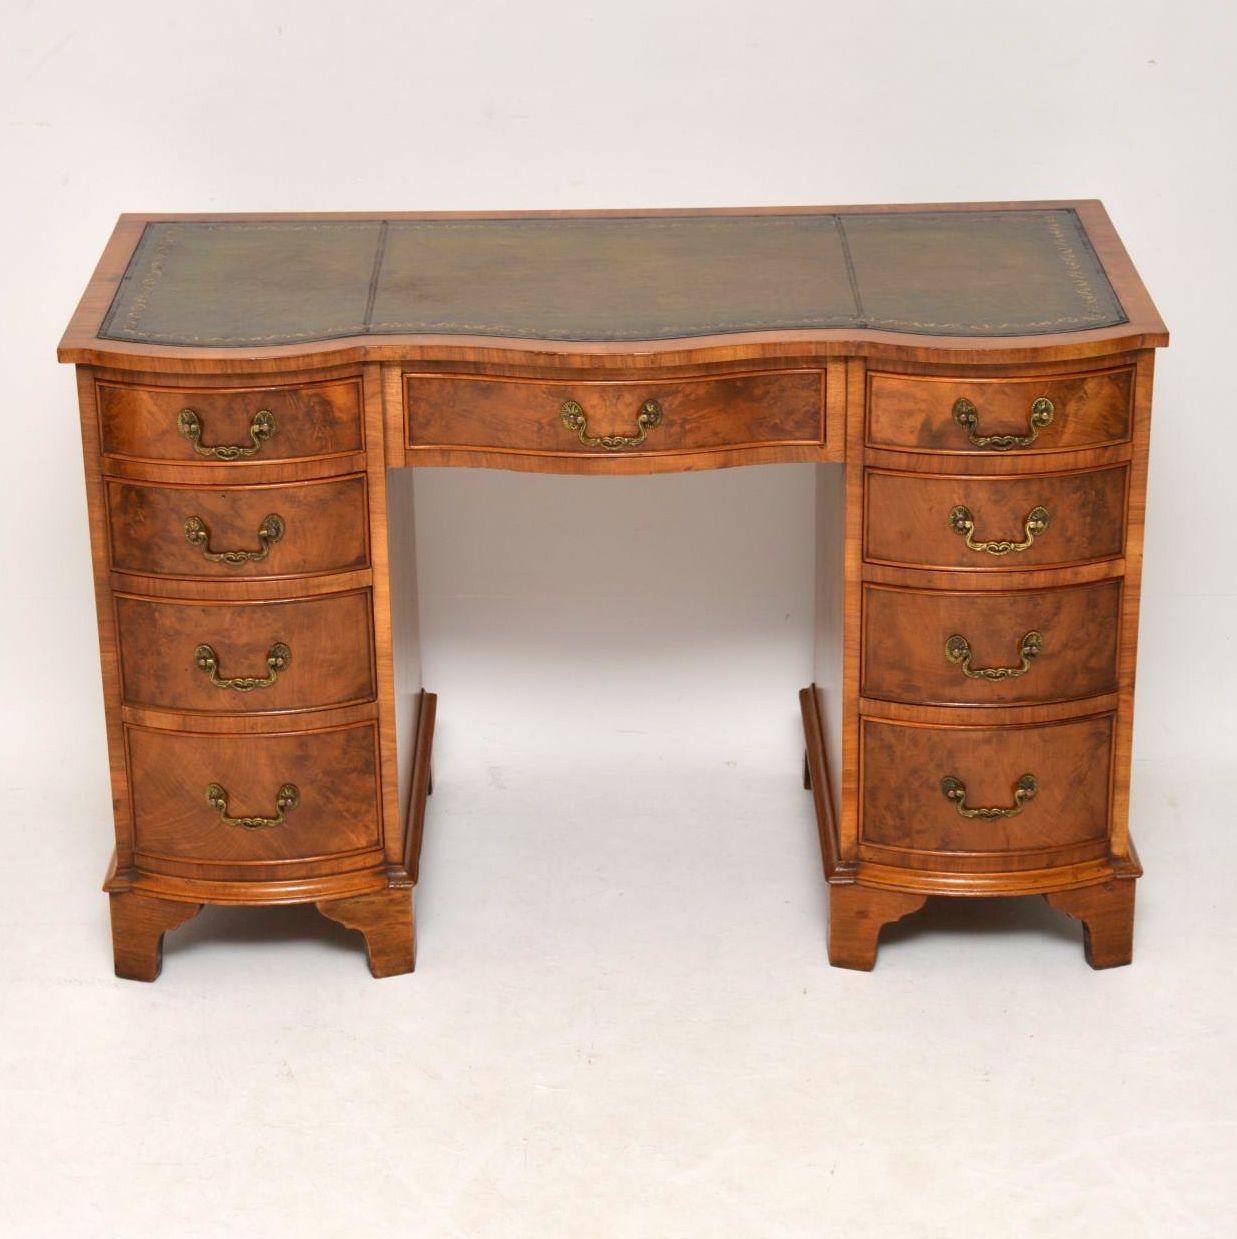 This antique Georgian style burr walnut desk is not too large, but still has a generous kneehole space. It has a double serpentine shaped front and a tooled leather hand colored leather writing surface. The pedestal drawers are all graduated in